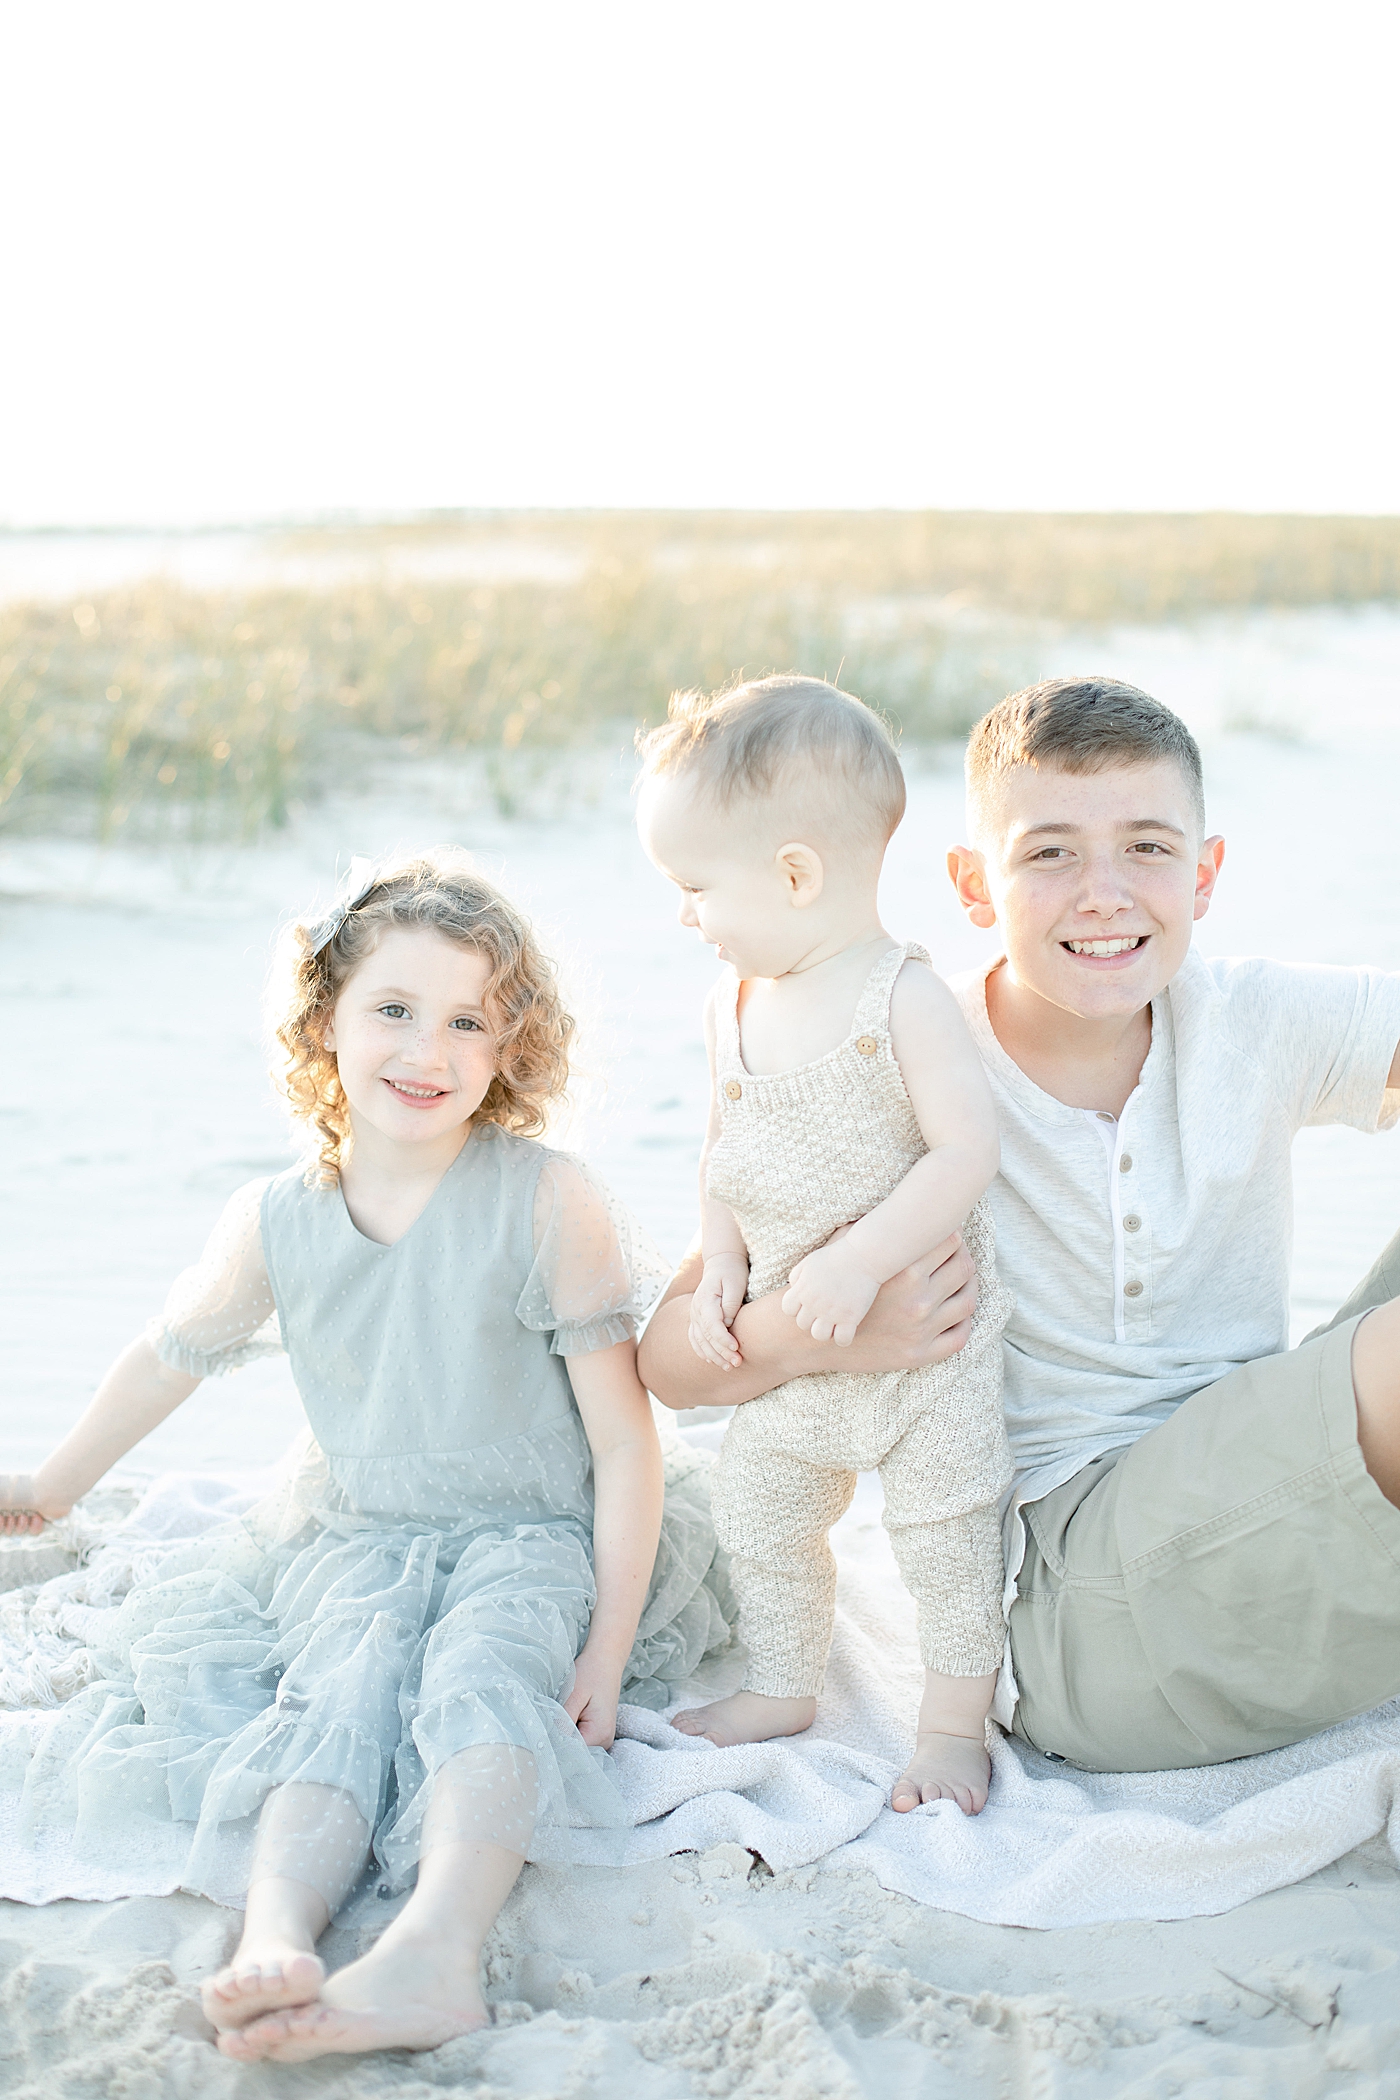 Kids sitting on the beach together | Photo by Little Sunshine Photography